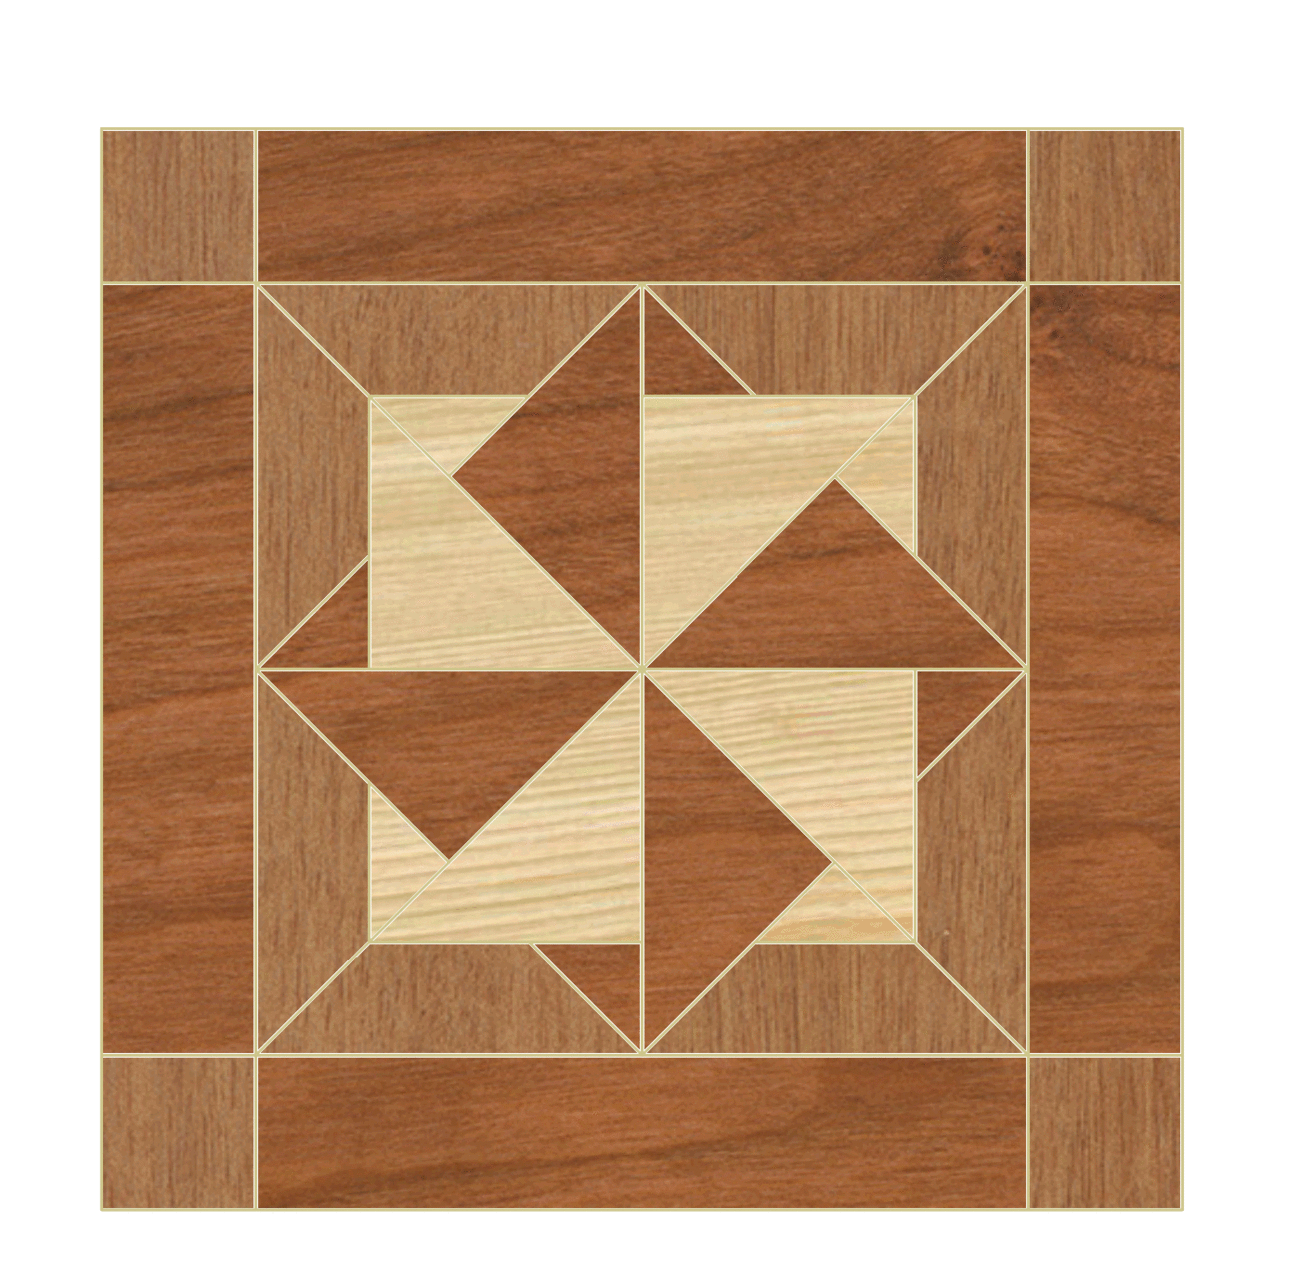 Woodworking patterns